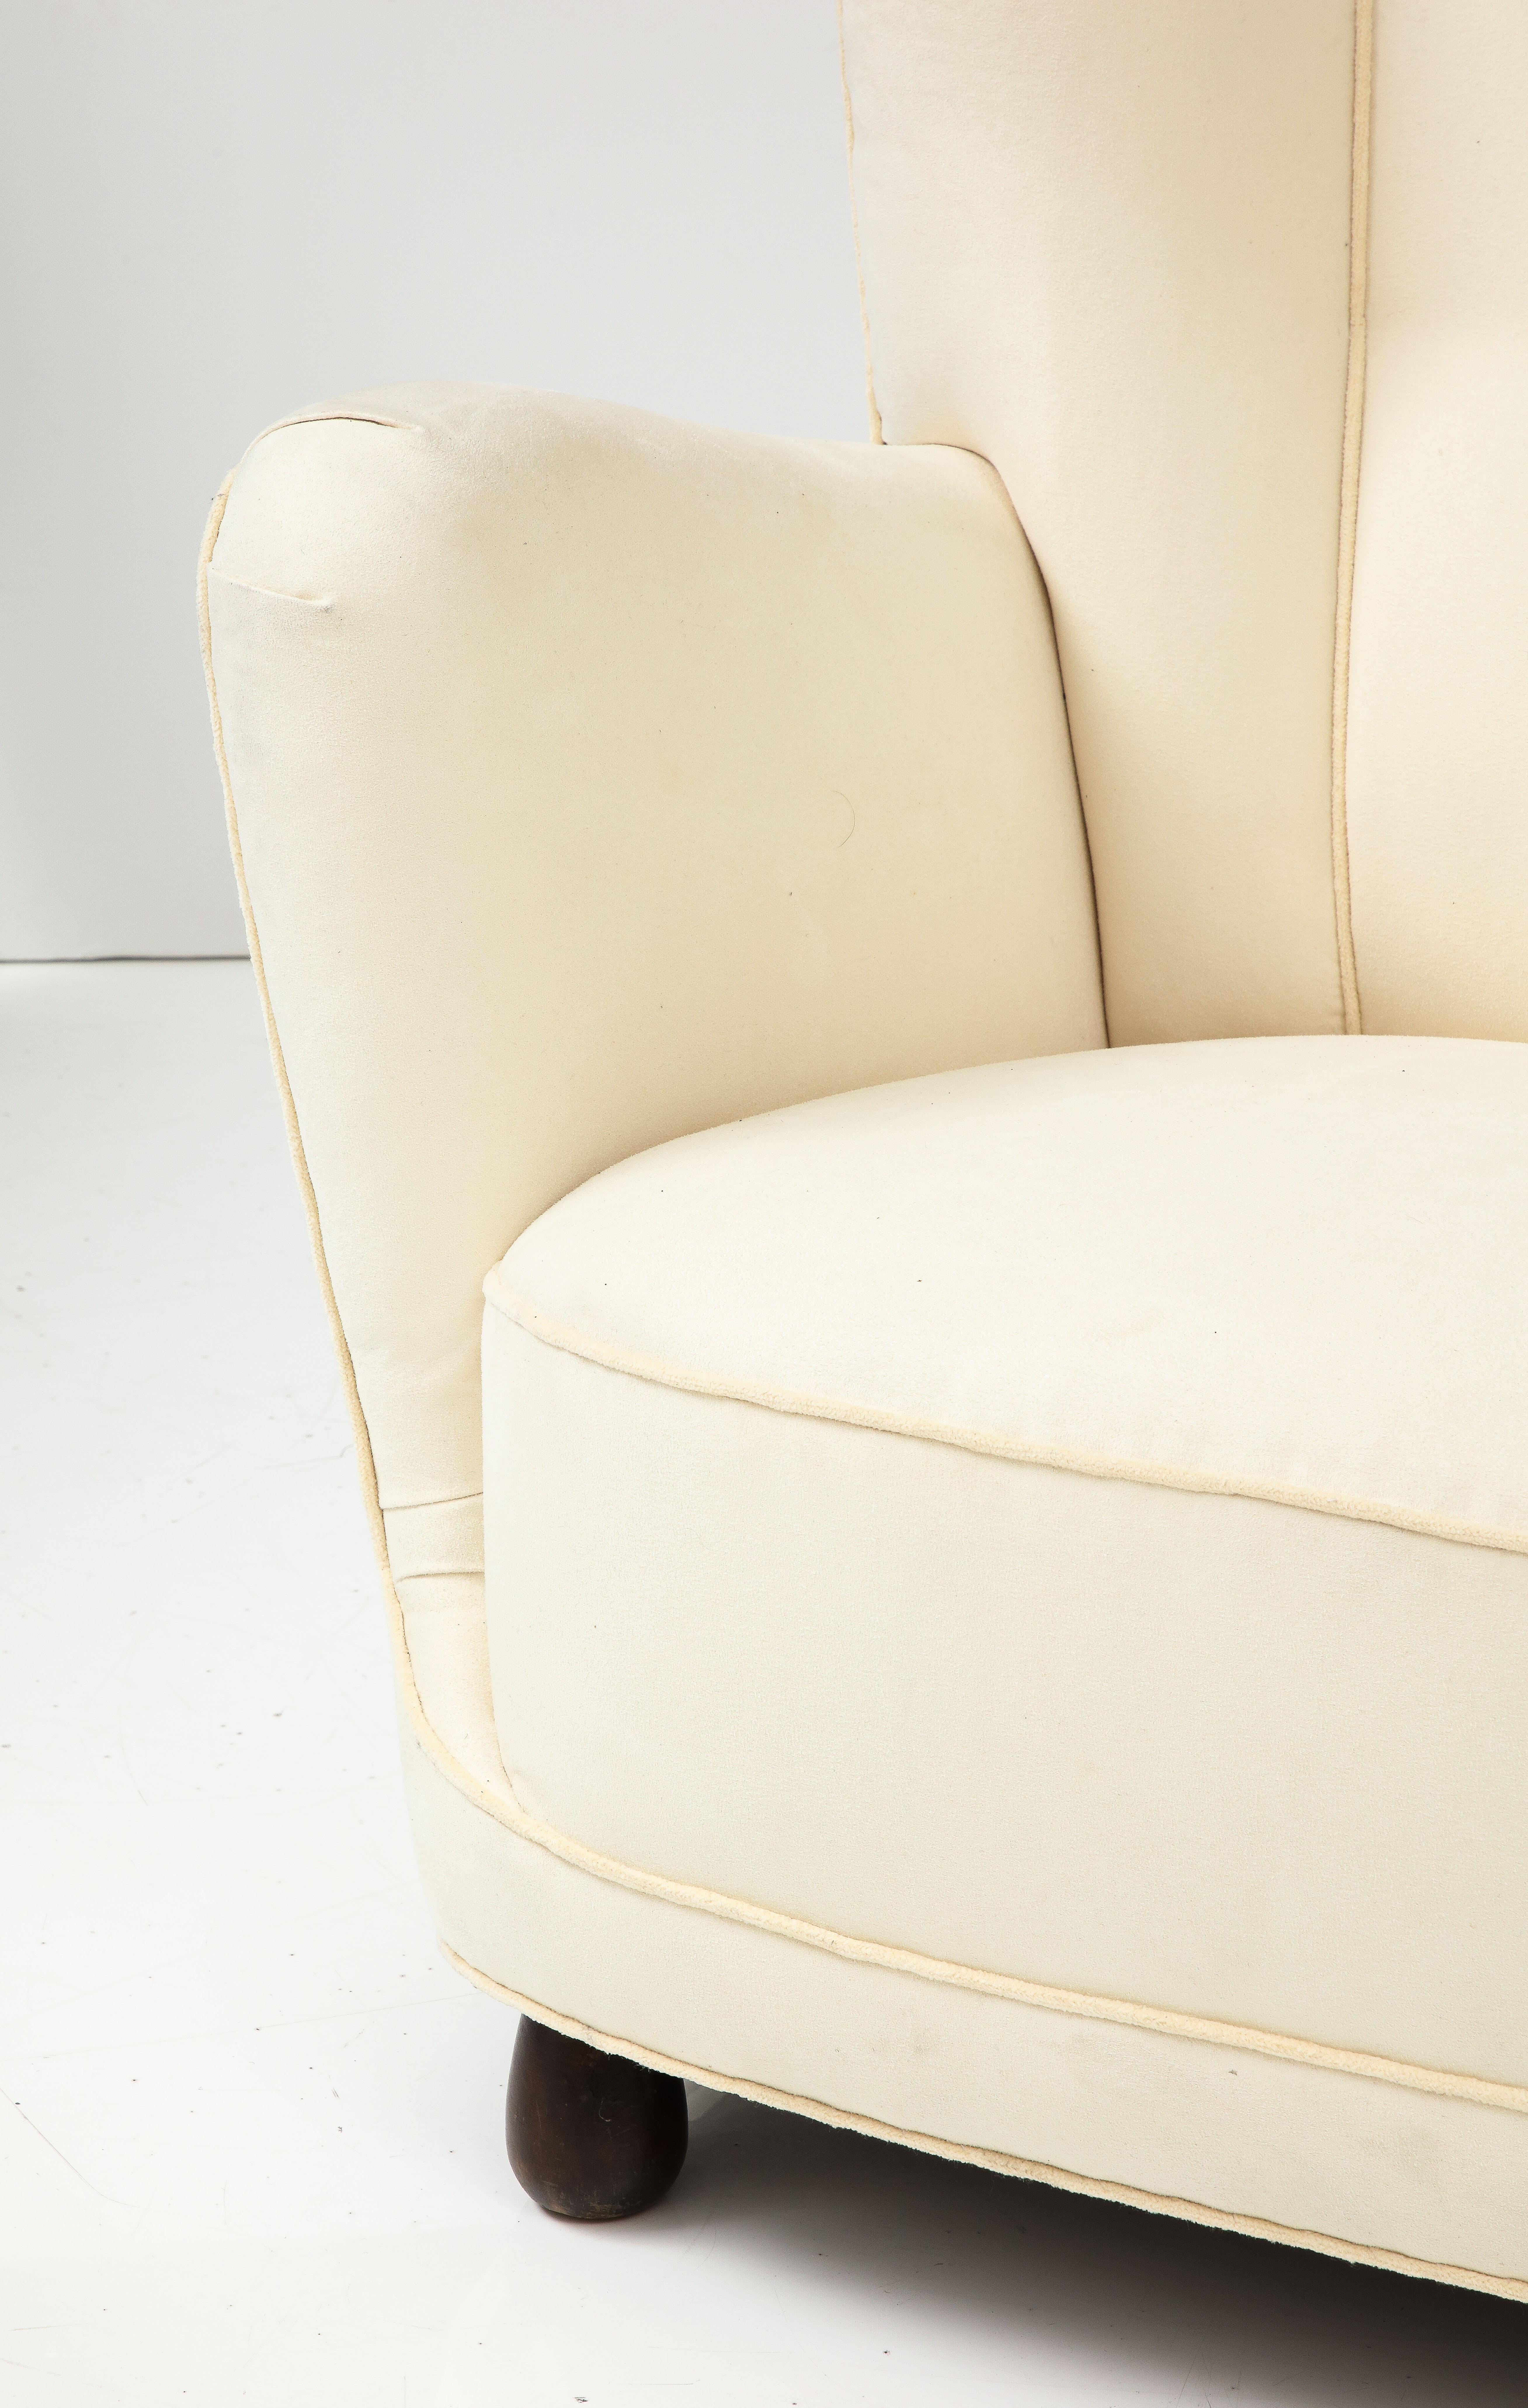 Mid-20th Century Danish Upholstered Club Chair in Muslin, 1940's For Sale